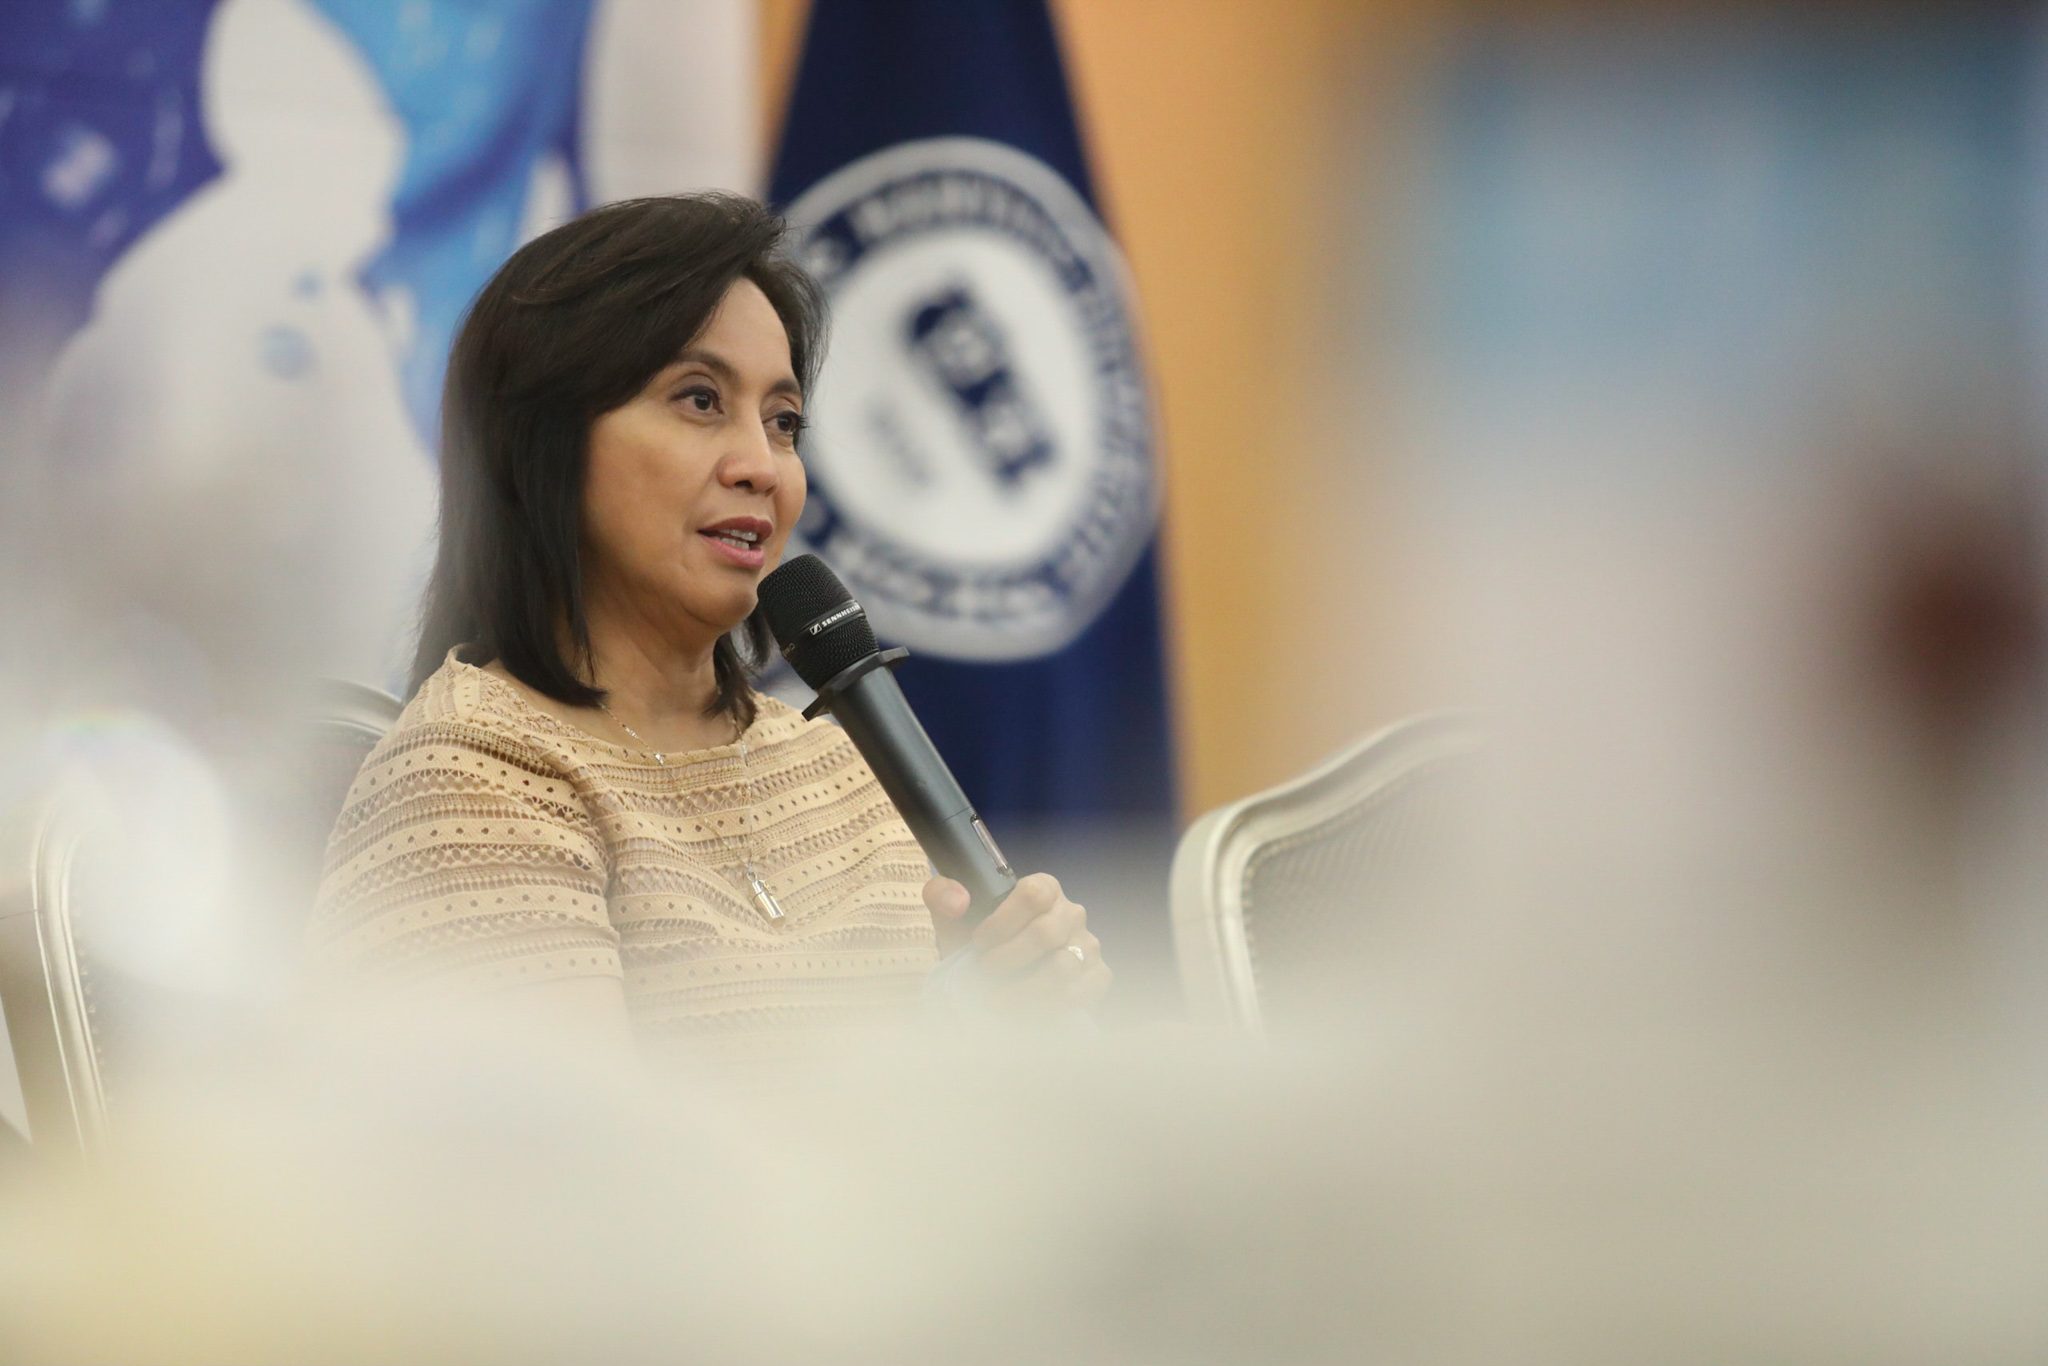 Robredo condemns arrest of lawyers: ‘Alarming erosion of rule of law’